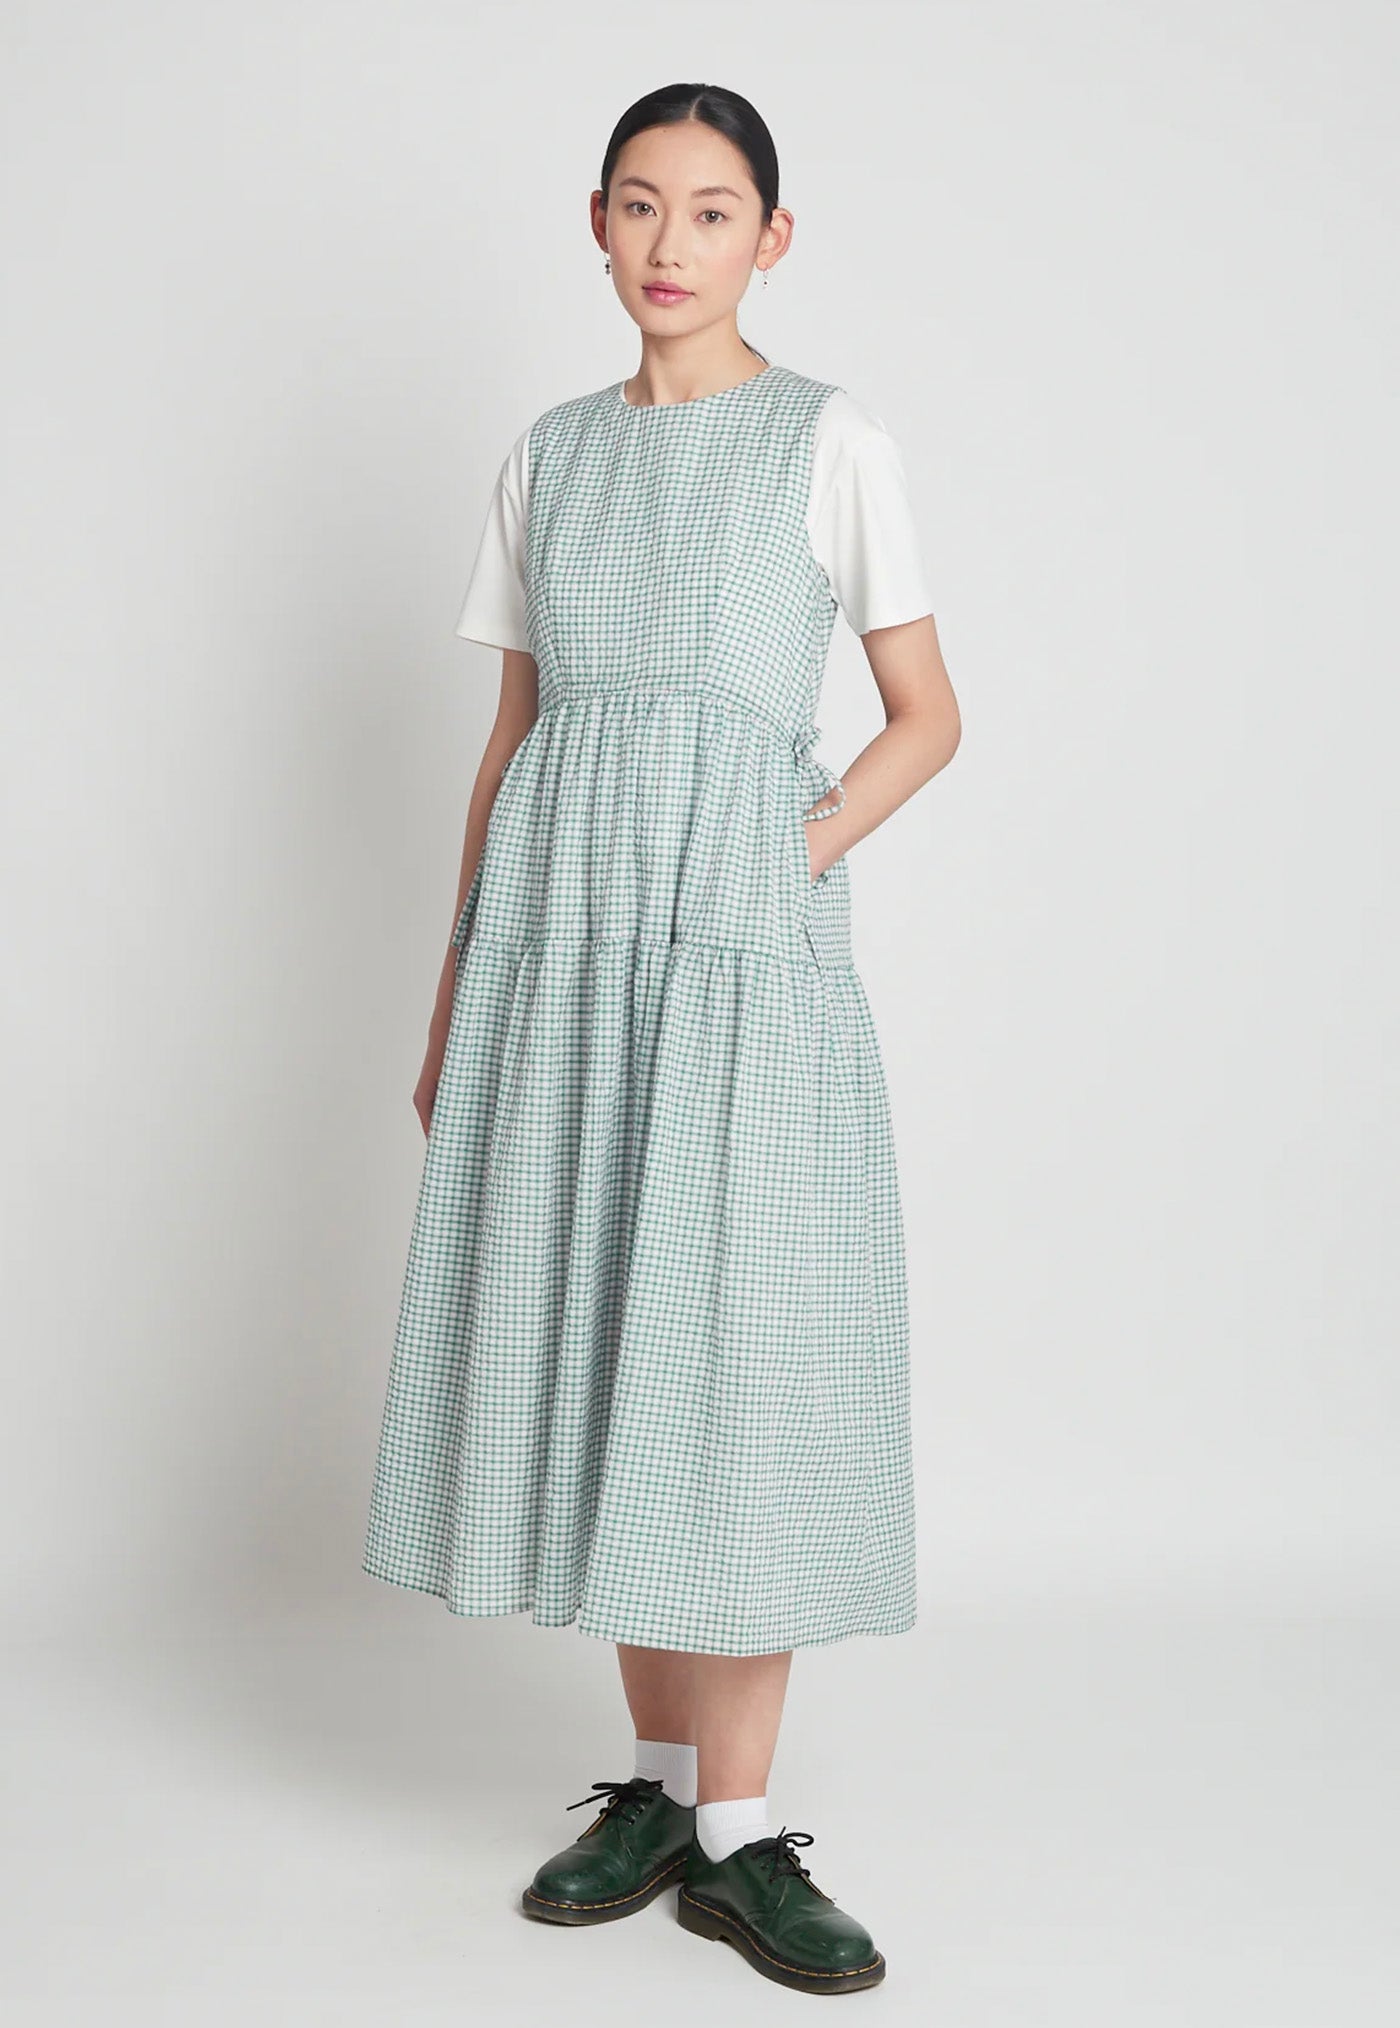 Neptune Dress - Green Gingham sold by Angel Divine